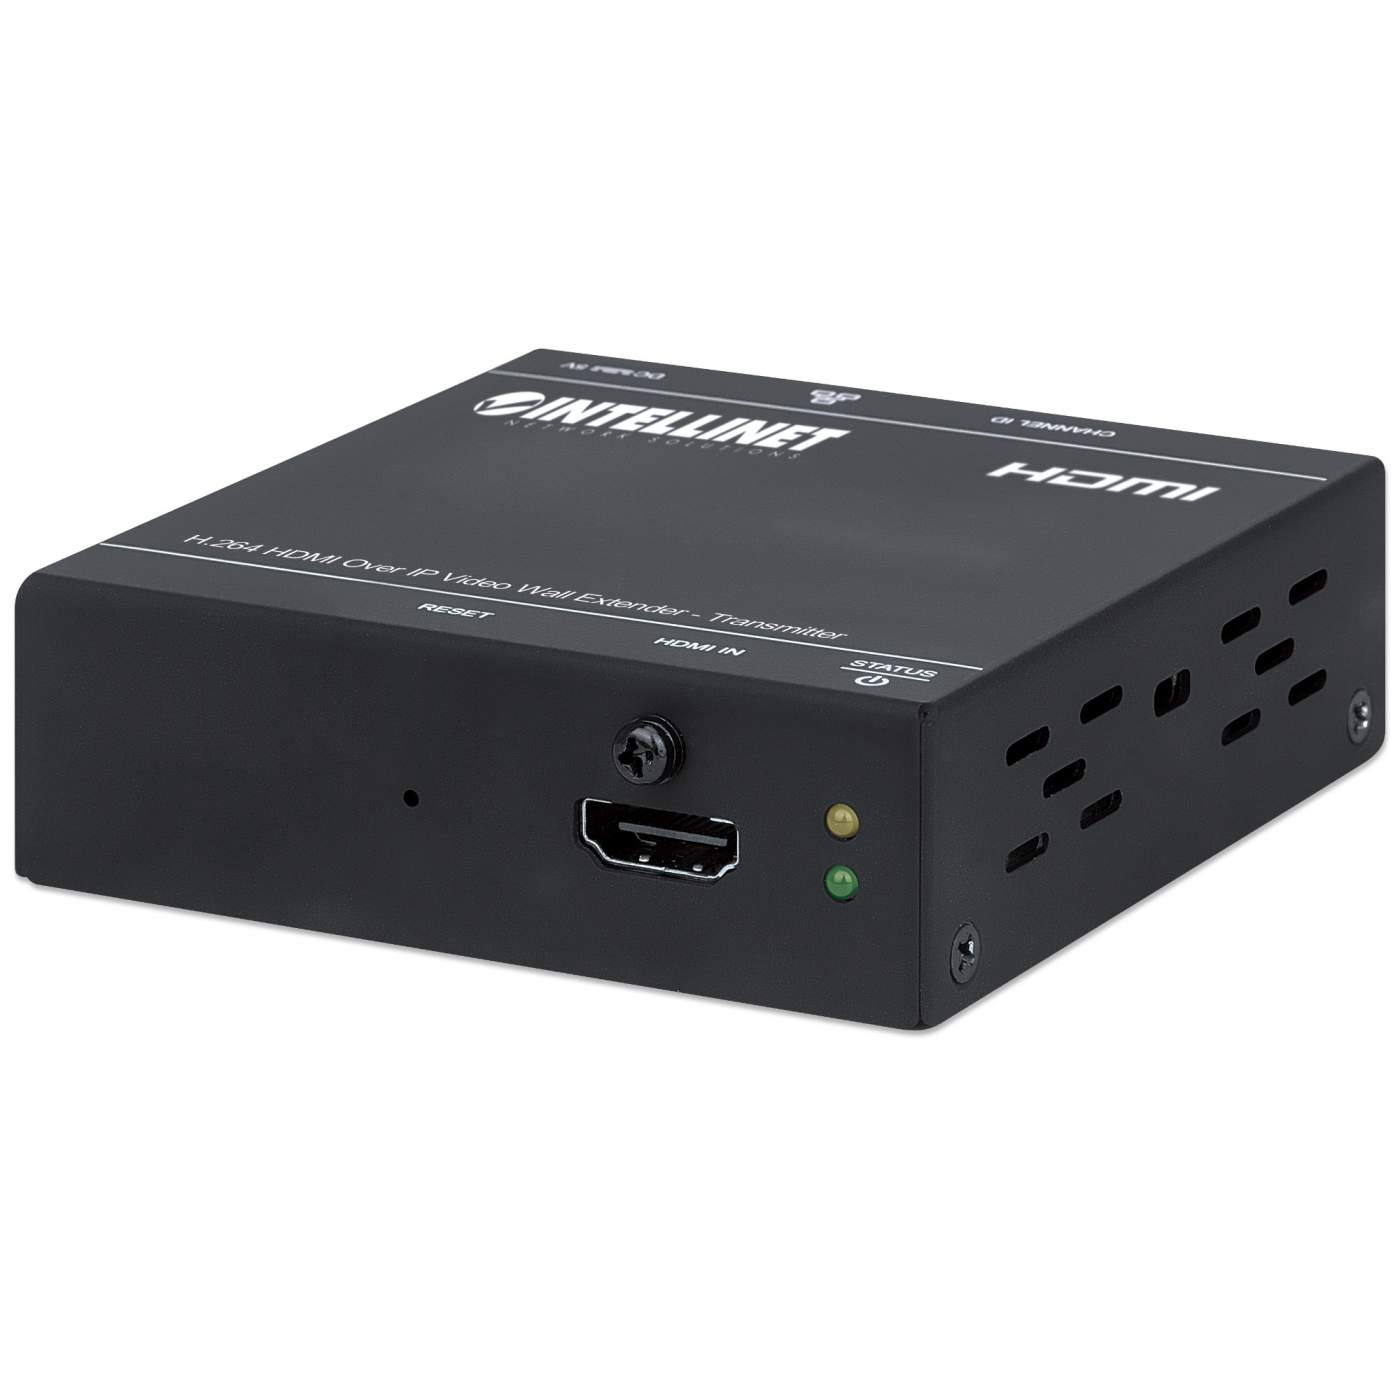 H.264 HDMI Over IP Video Wall Extender - Transmitter Image 1